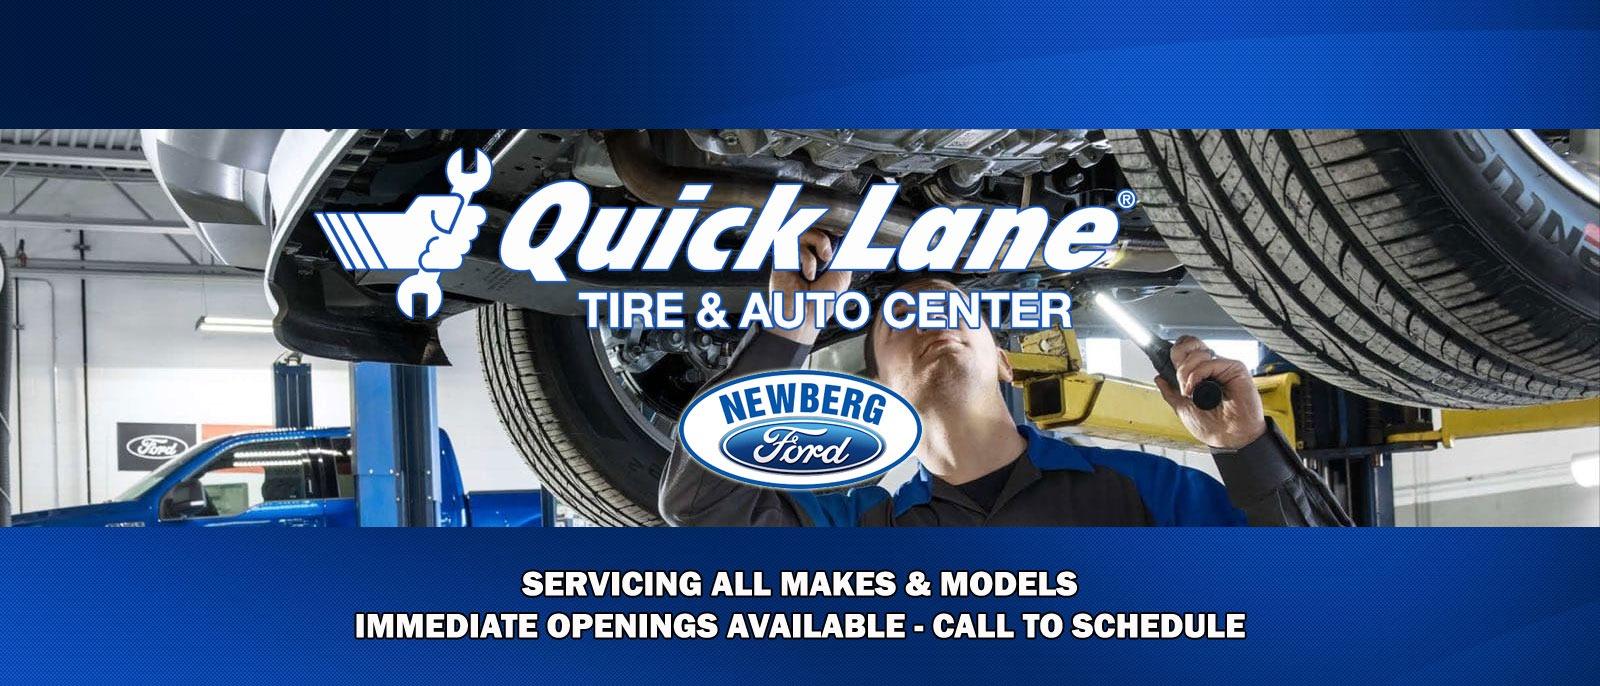 Quick Lane Service - Immediate Openings Available - Ford Technician working on vehicle